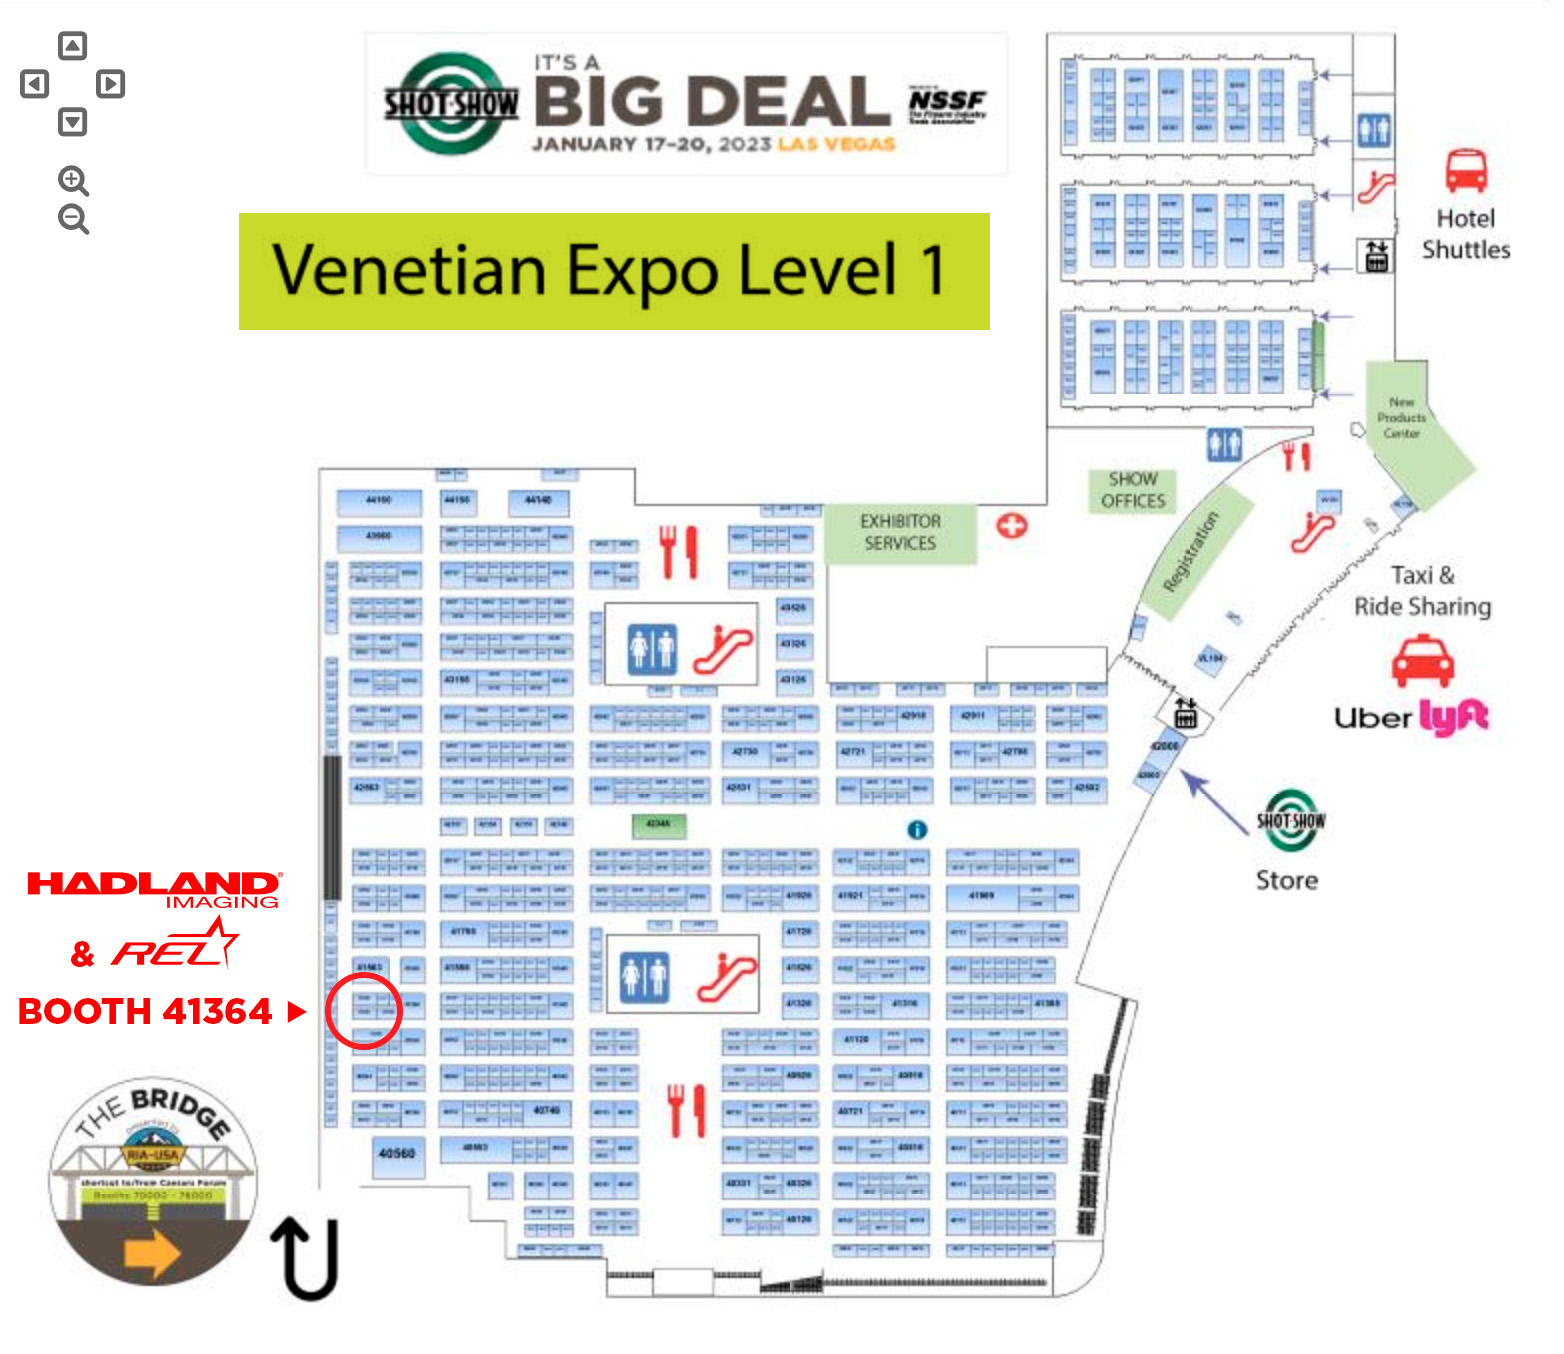 Hadland Imaging and REL at the 2023 SHOT Show in Las Vegas – Venetian Expo Level 1 Floor Plan, Booth 41364.